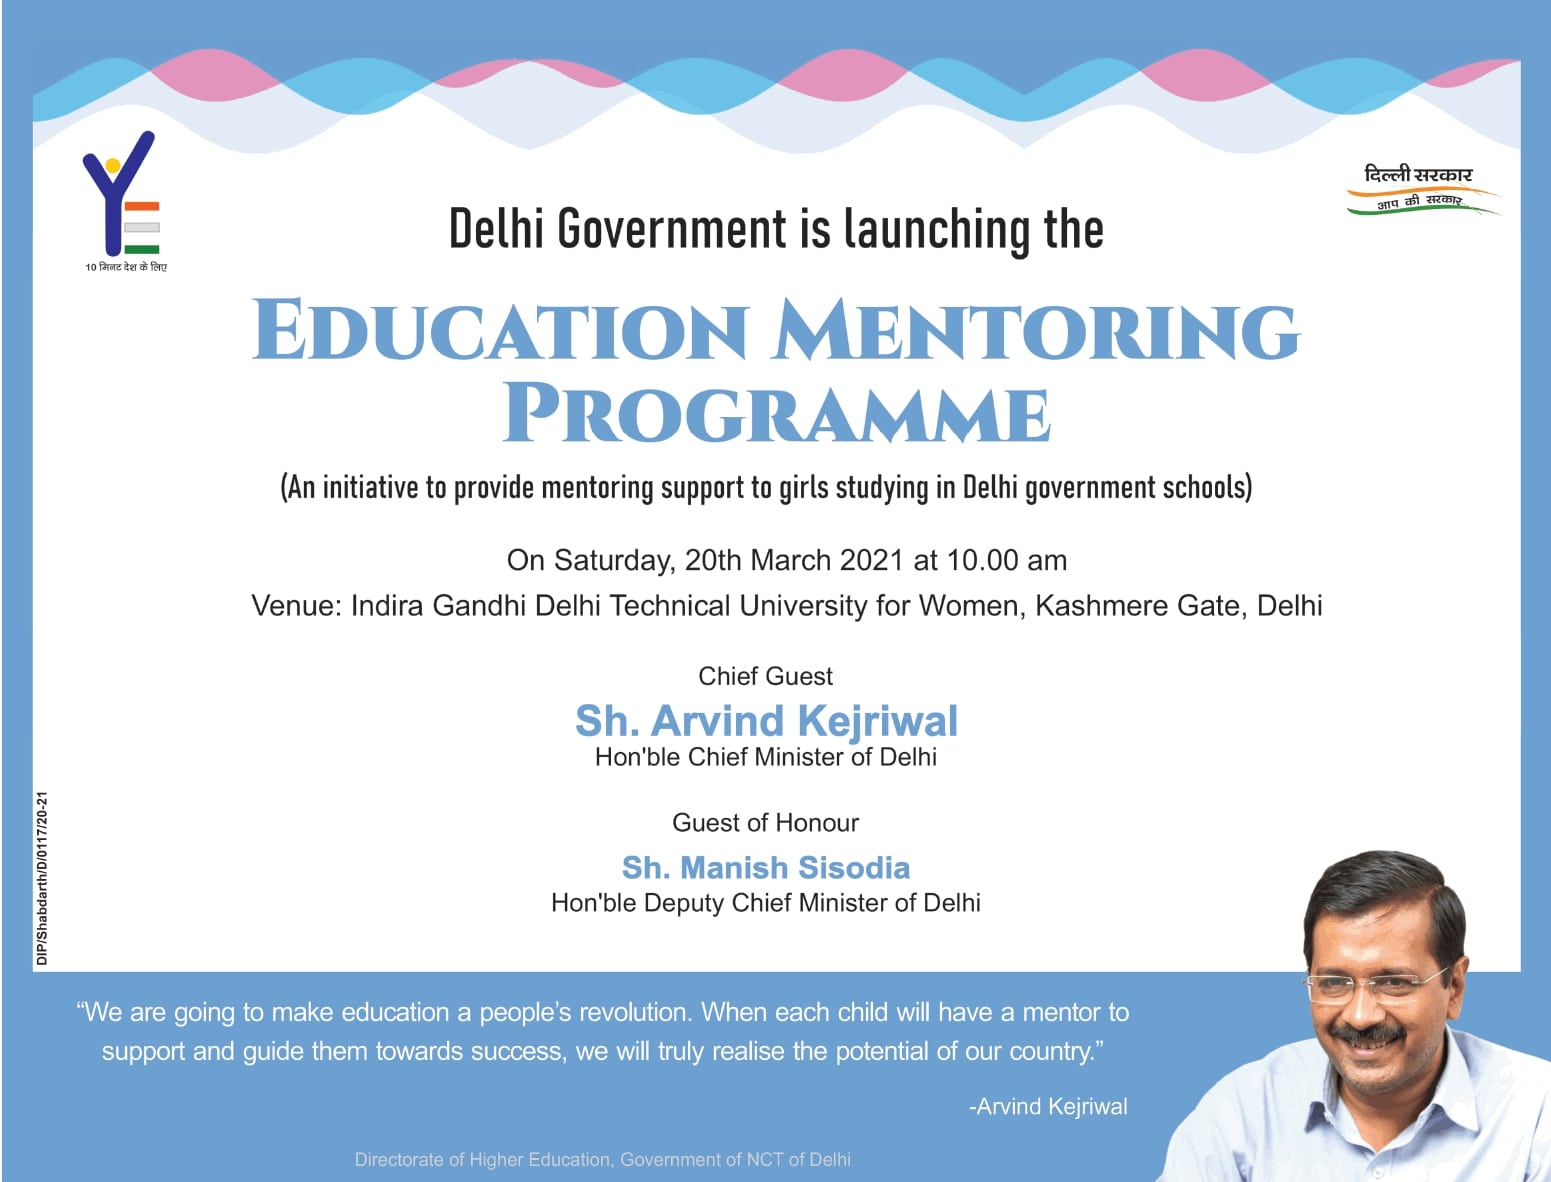 delhi-government-is-launching-education-mentoring-programme-ad-times-of-india-delhi-20-03-2021